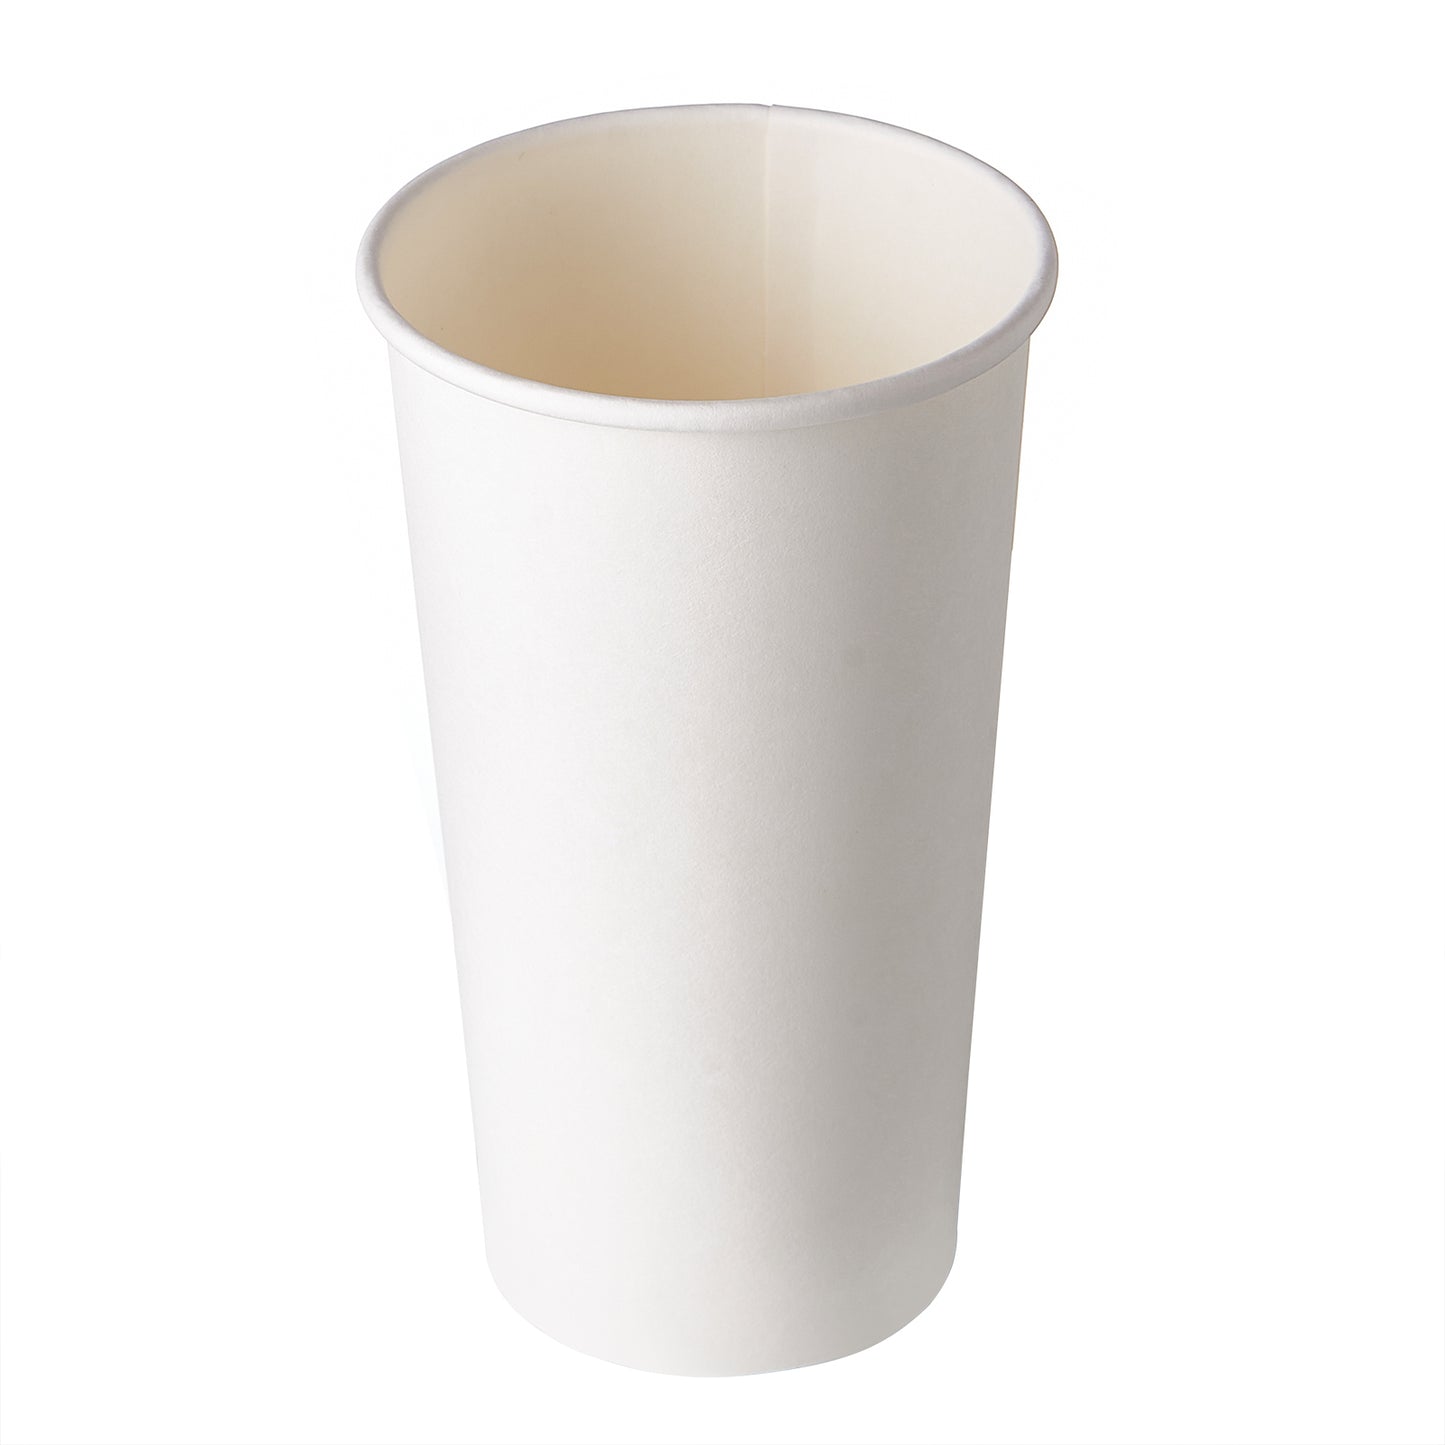 CIAO! Paper Hot Cup, 20 oz Disposable Cup, White, 1,000 Count